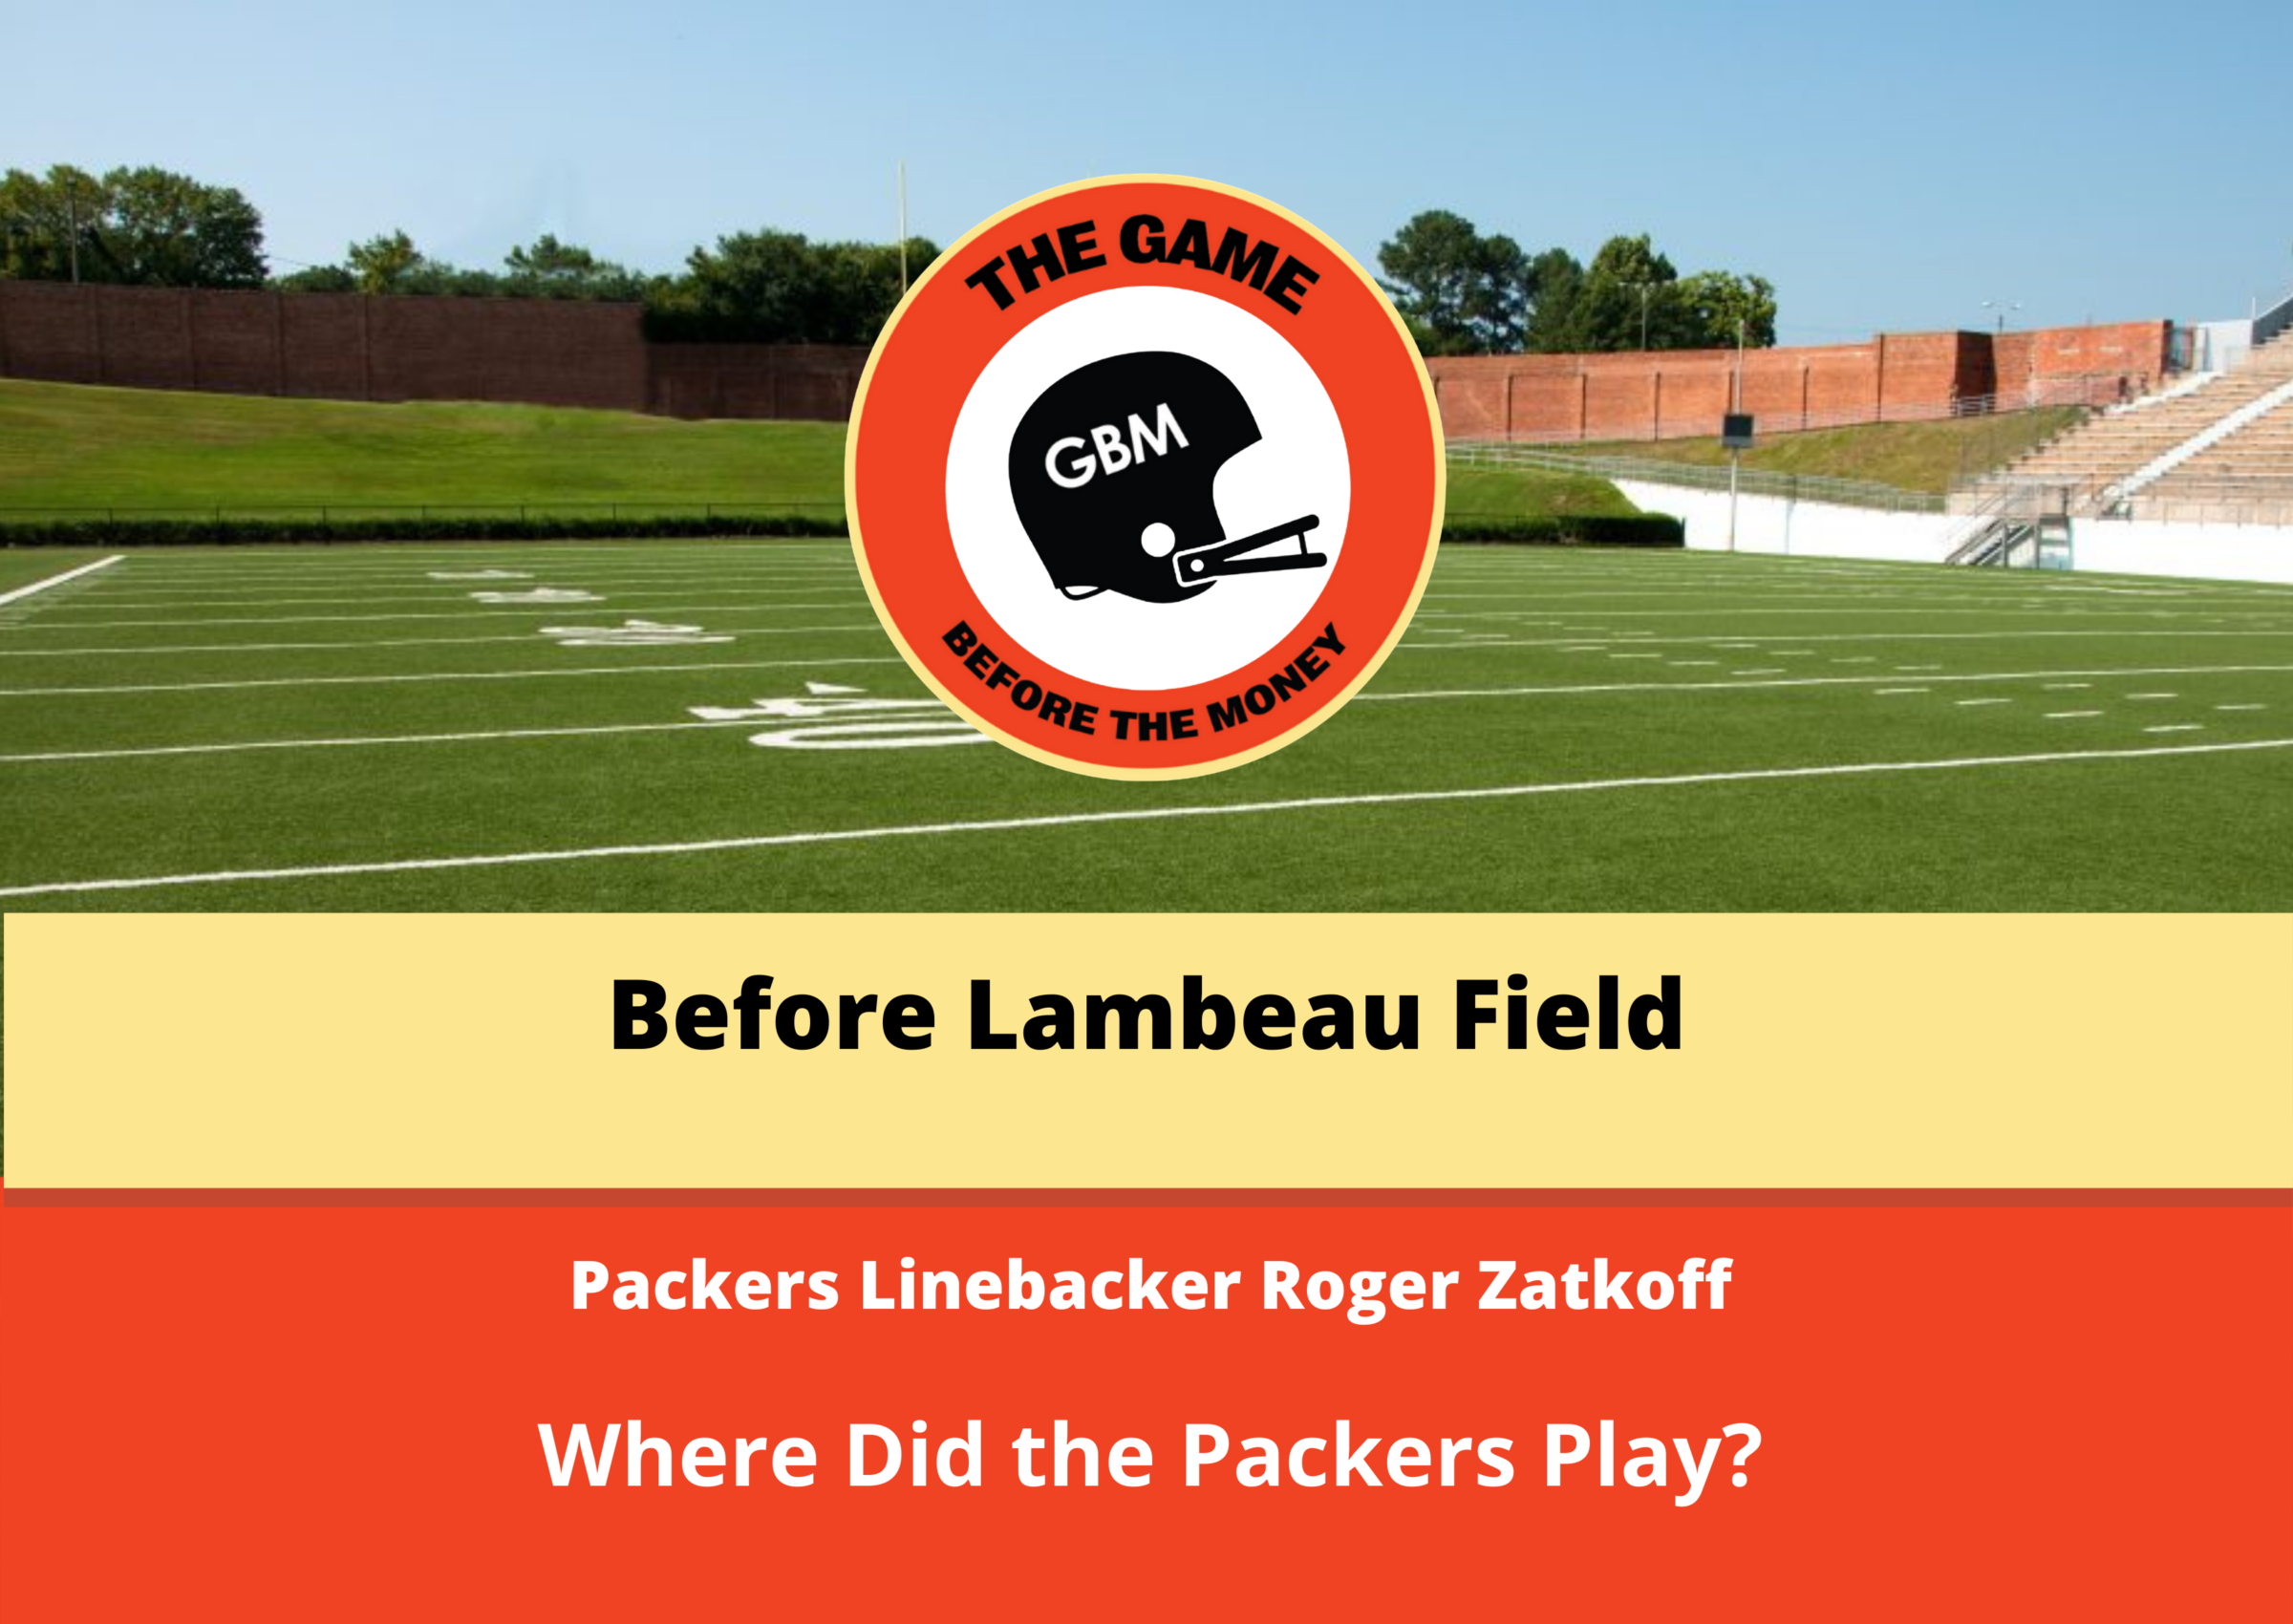 Where Did The Packers Play Before Lambeau Field?